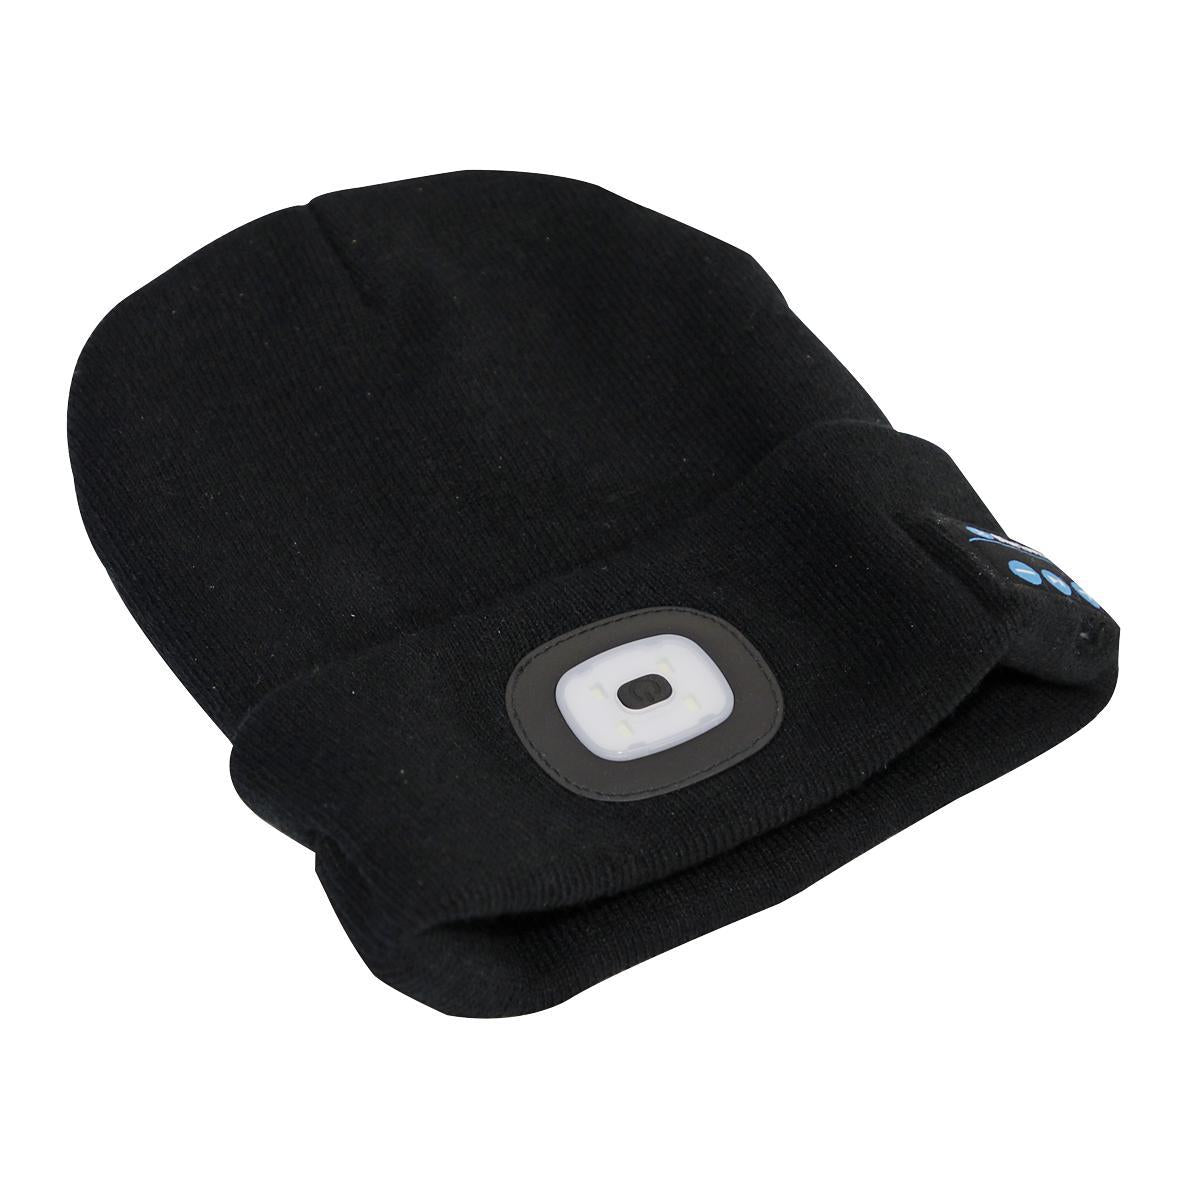 Beanie Hat 4 SMD LED USB Rechargeable with Wireless Headphones